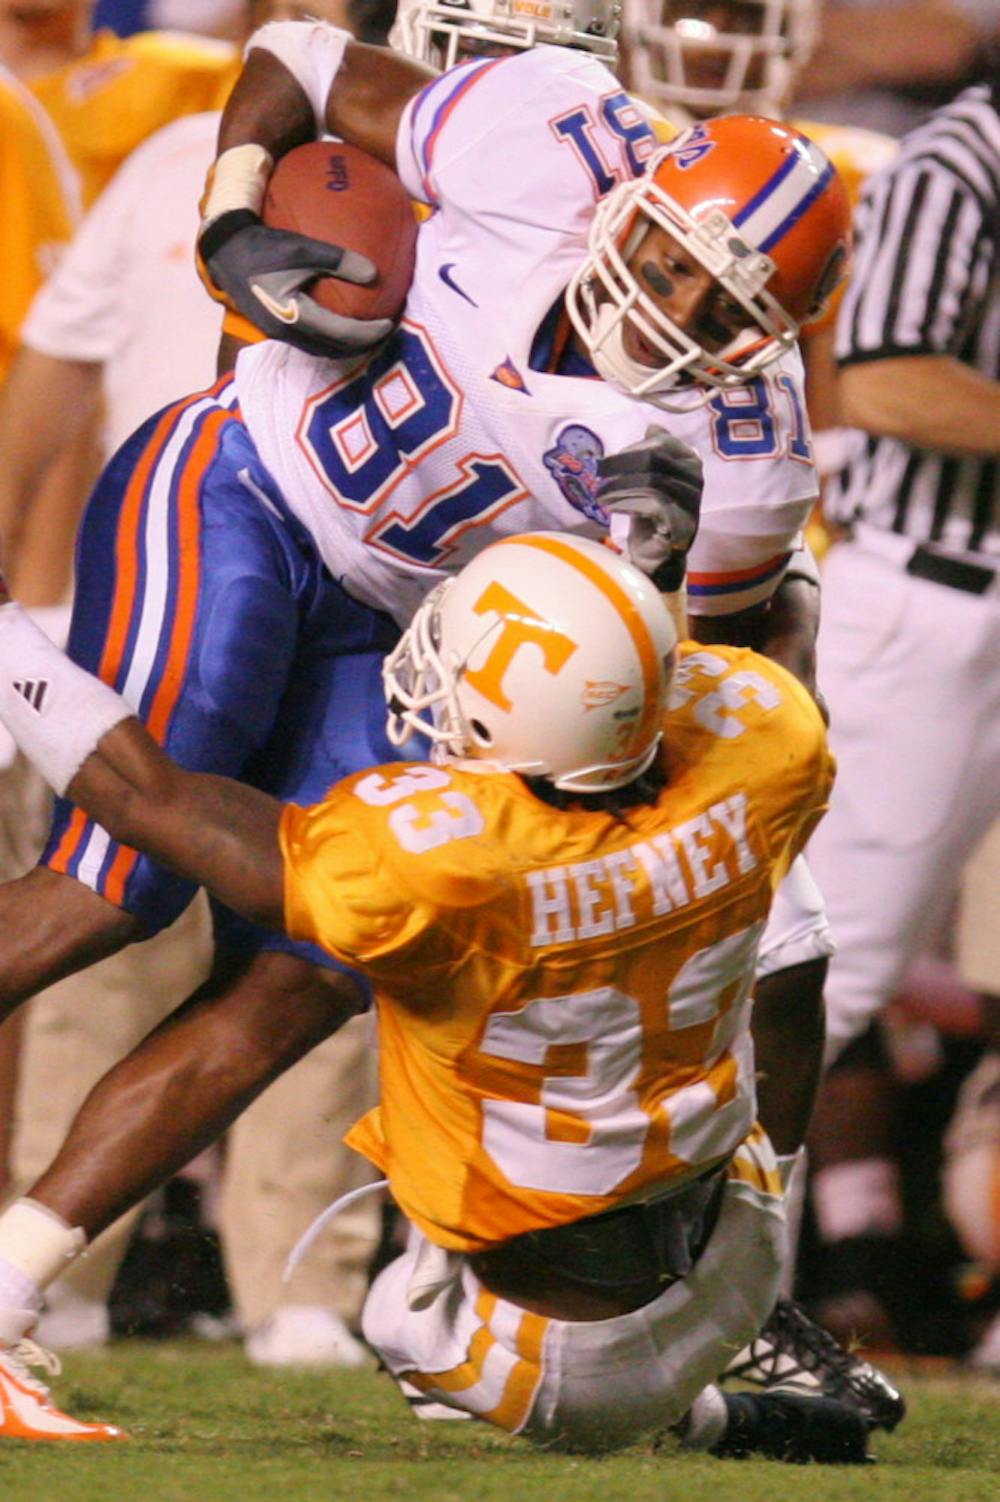 <p>Former Gators wide receiver Dallas Baker (81) breaks a tackle during Florida’s 21-20 victory against Tennessee on Sept. 16, 2006 in Neyland Stadium in Knoxville, Tenn.</p>